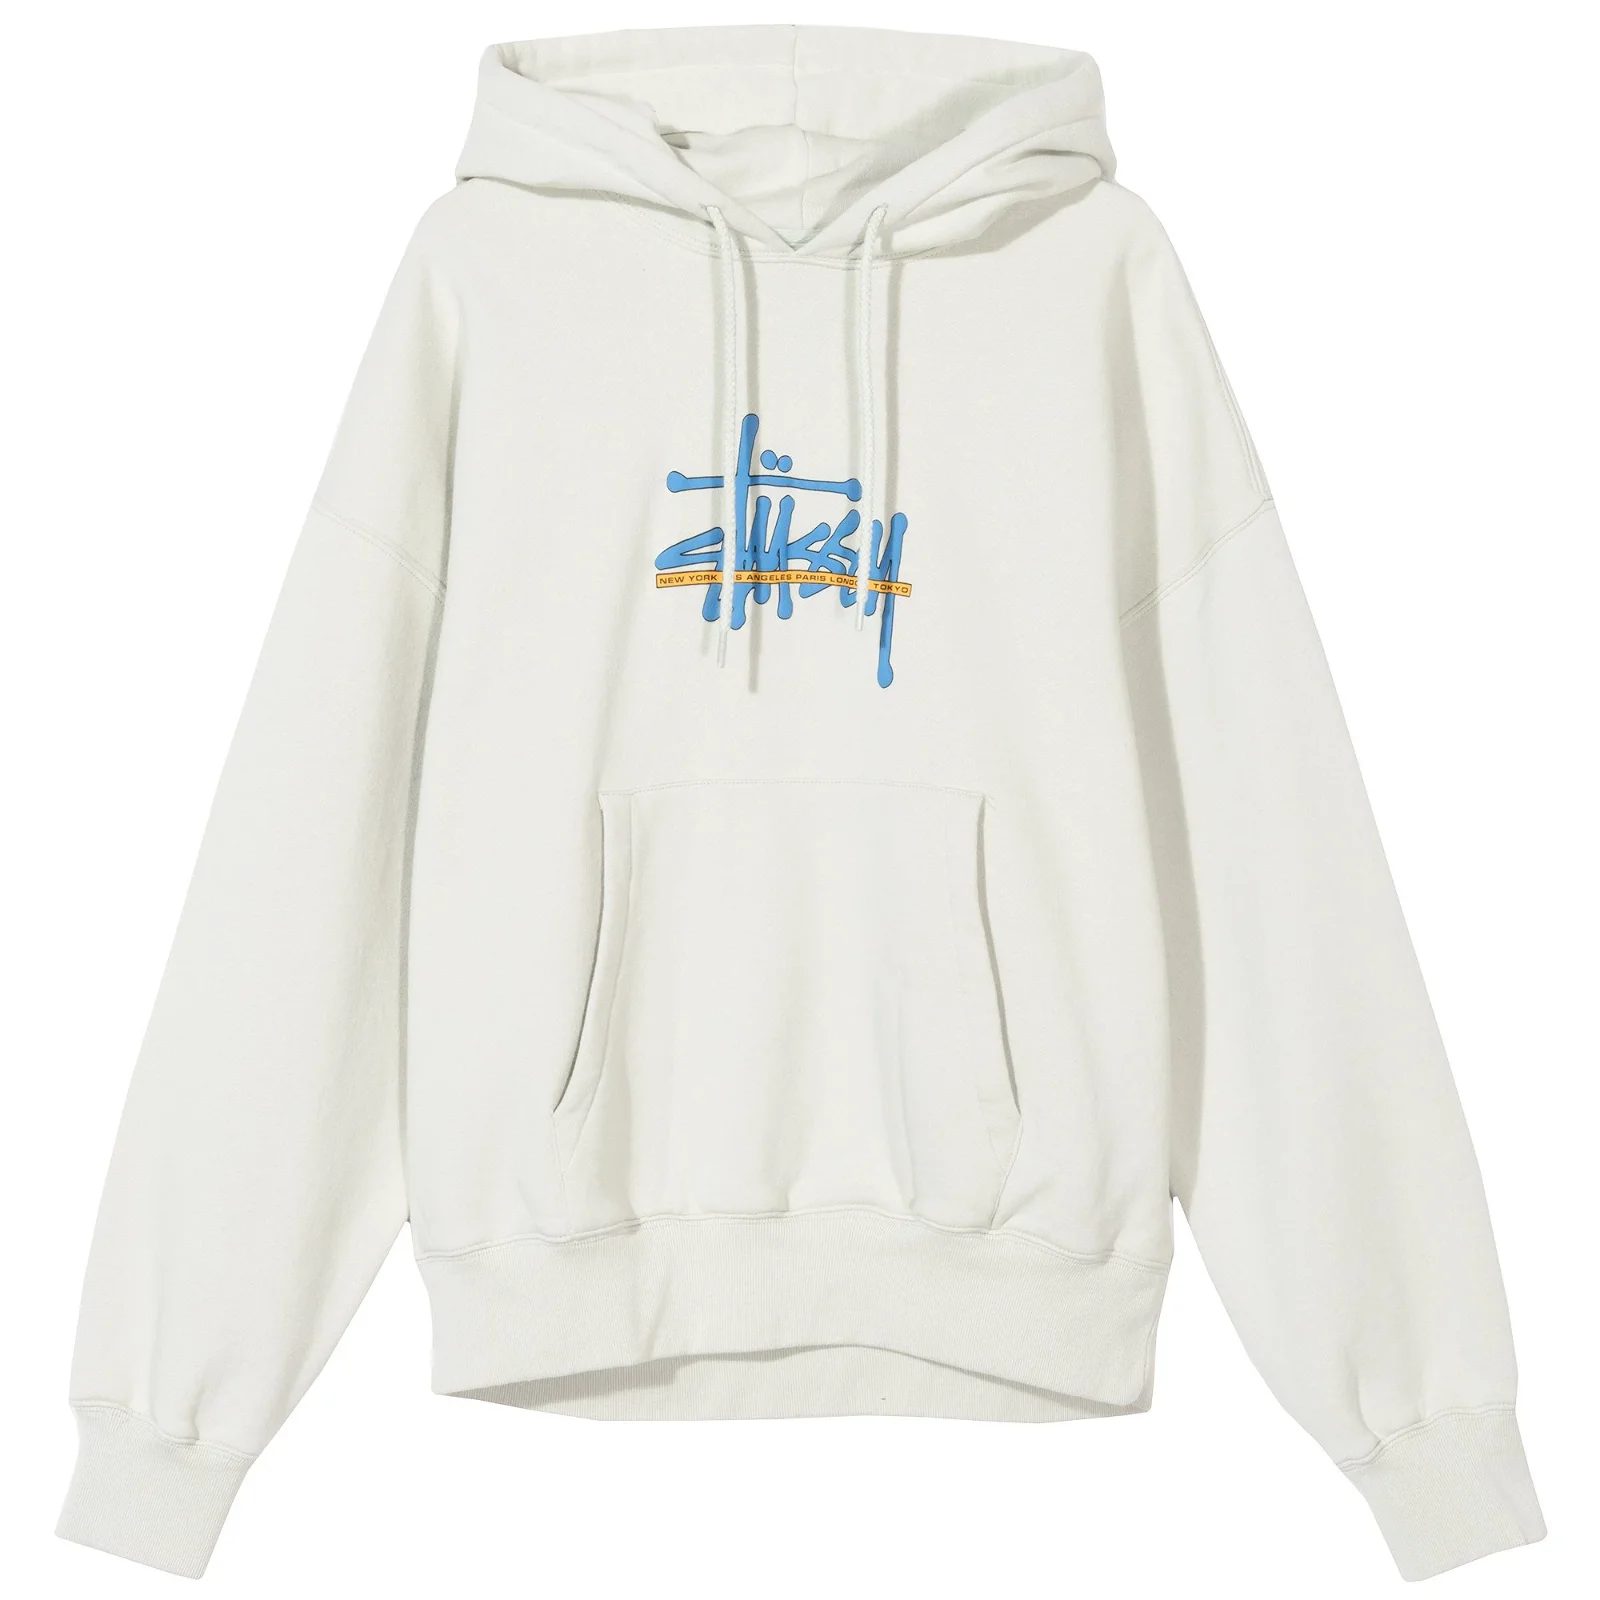 Stussy Women: Holiday '19 – Third Delivery | Milled